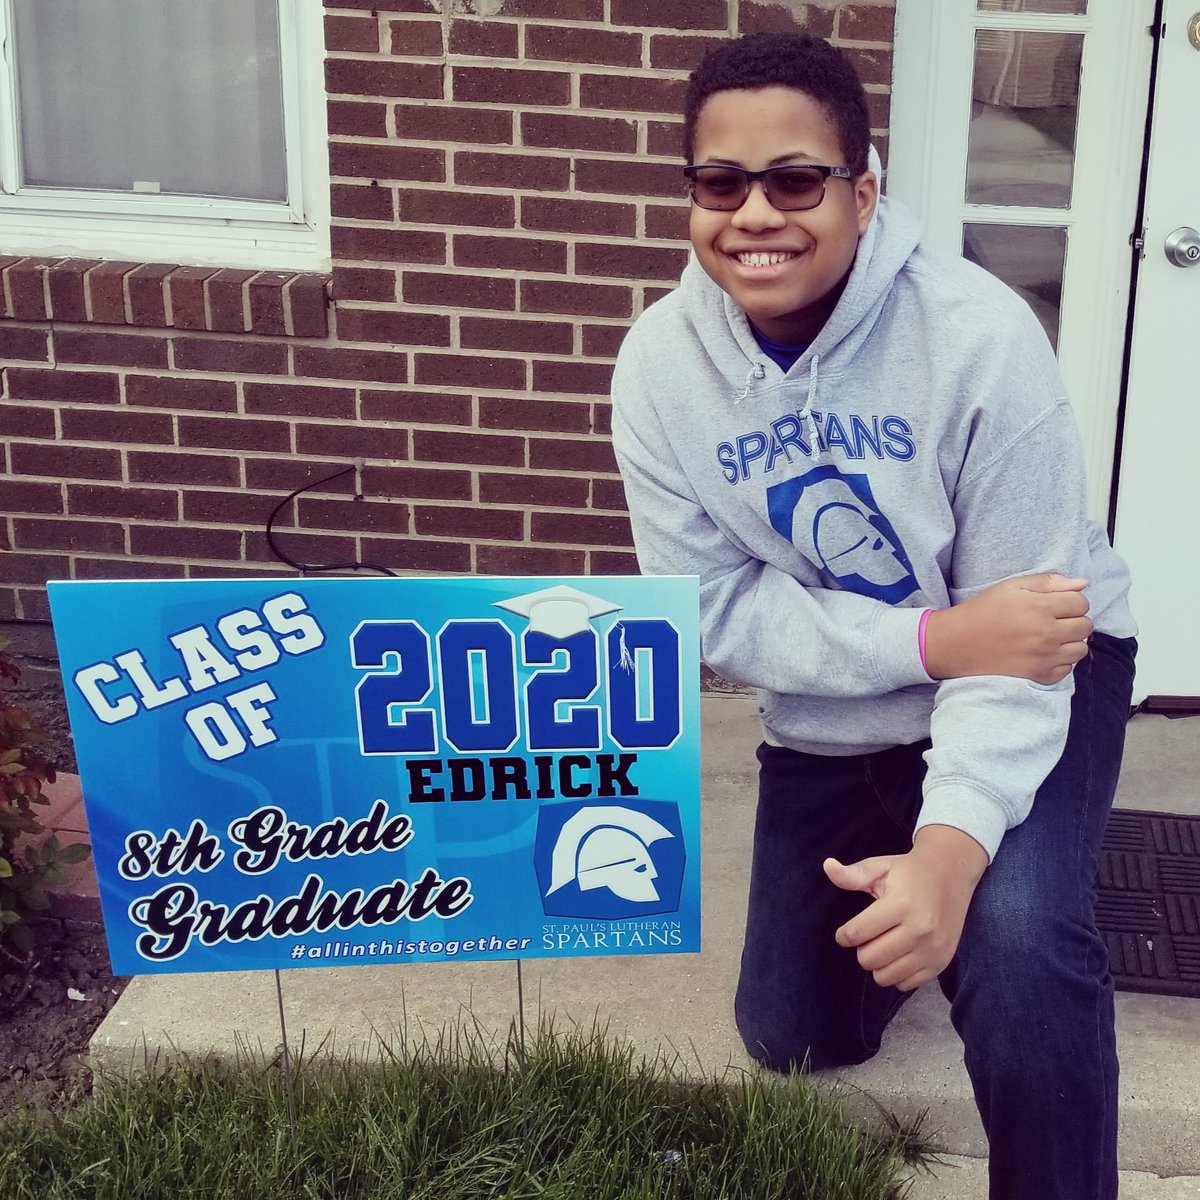 CONGRATULATIONS to our son Edrick A. Harris, Jr.... thank you #StPaulMunster for the sign!!! 

#ProudParentsMoment
#CantStopSmiling
#ThatsOurBoy
#CongratulationsEJ
#Classof2020